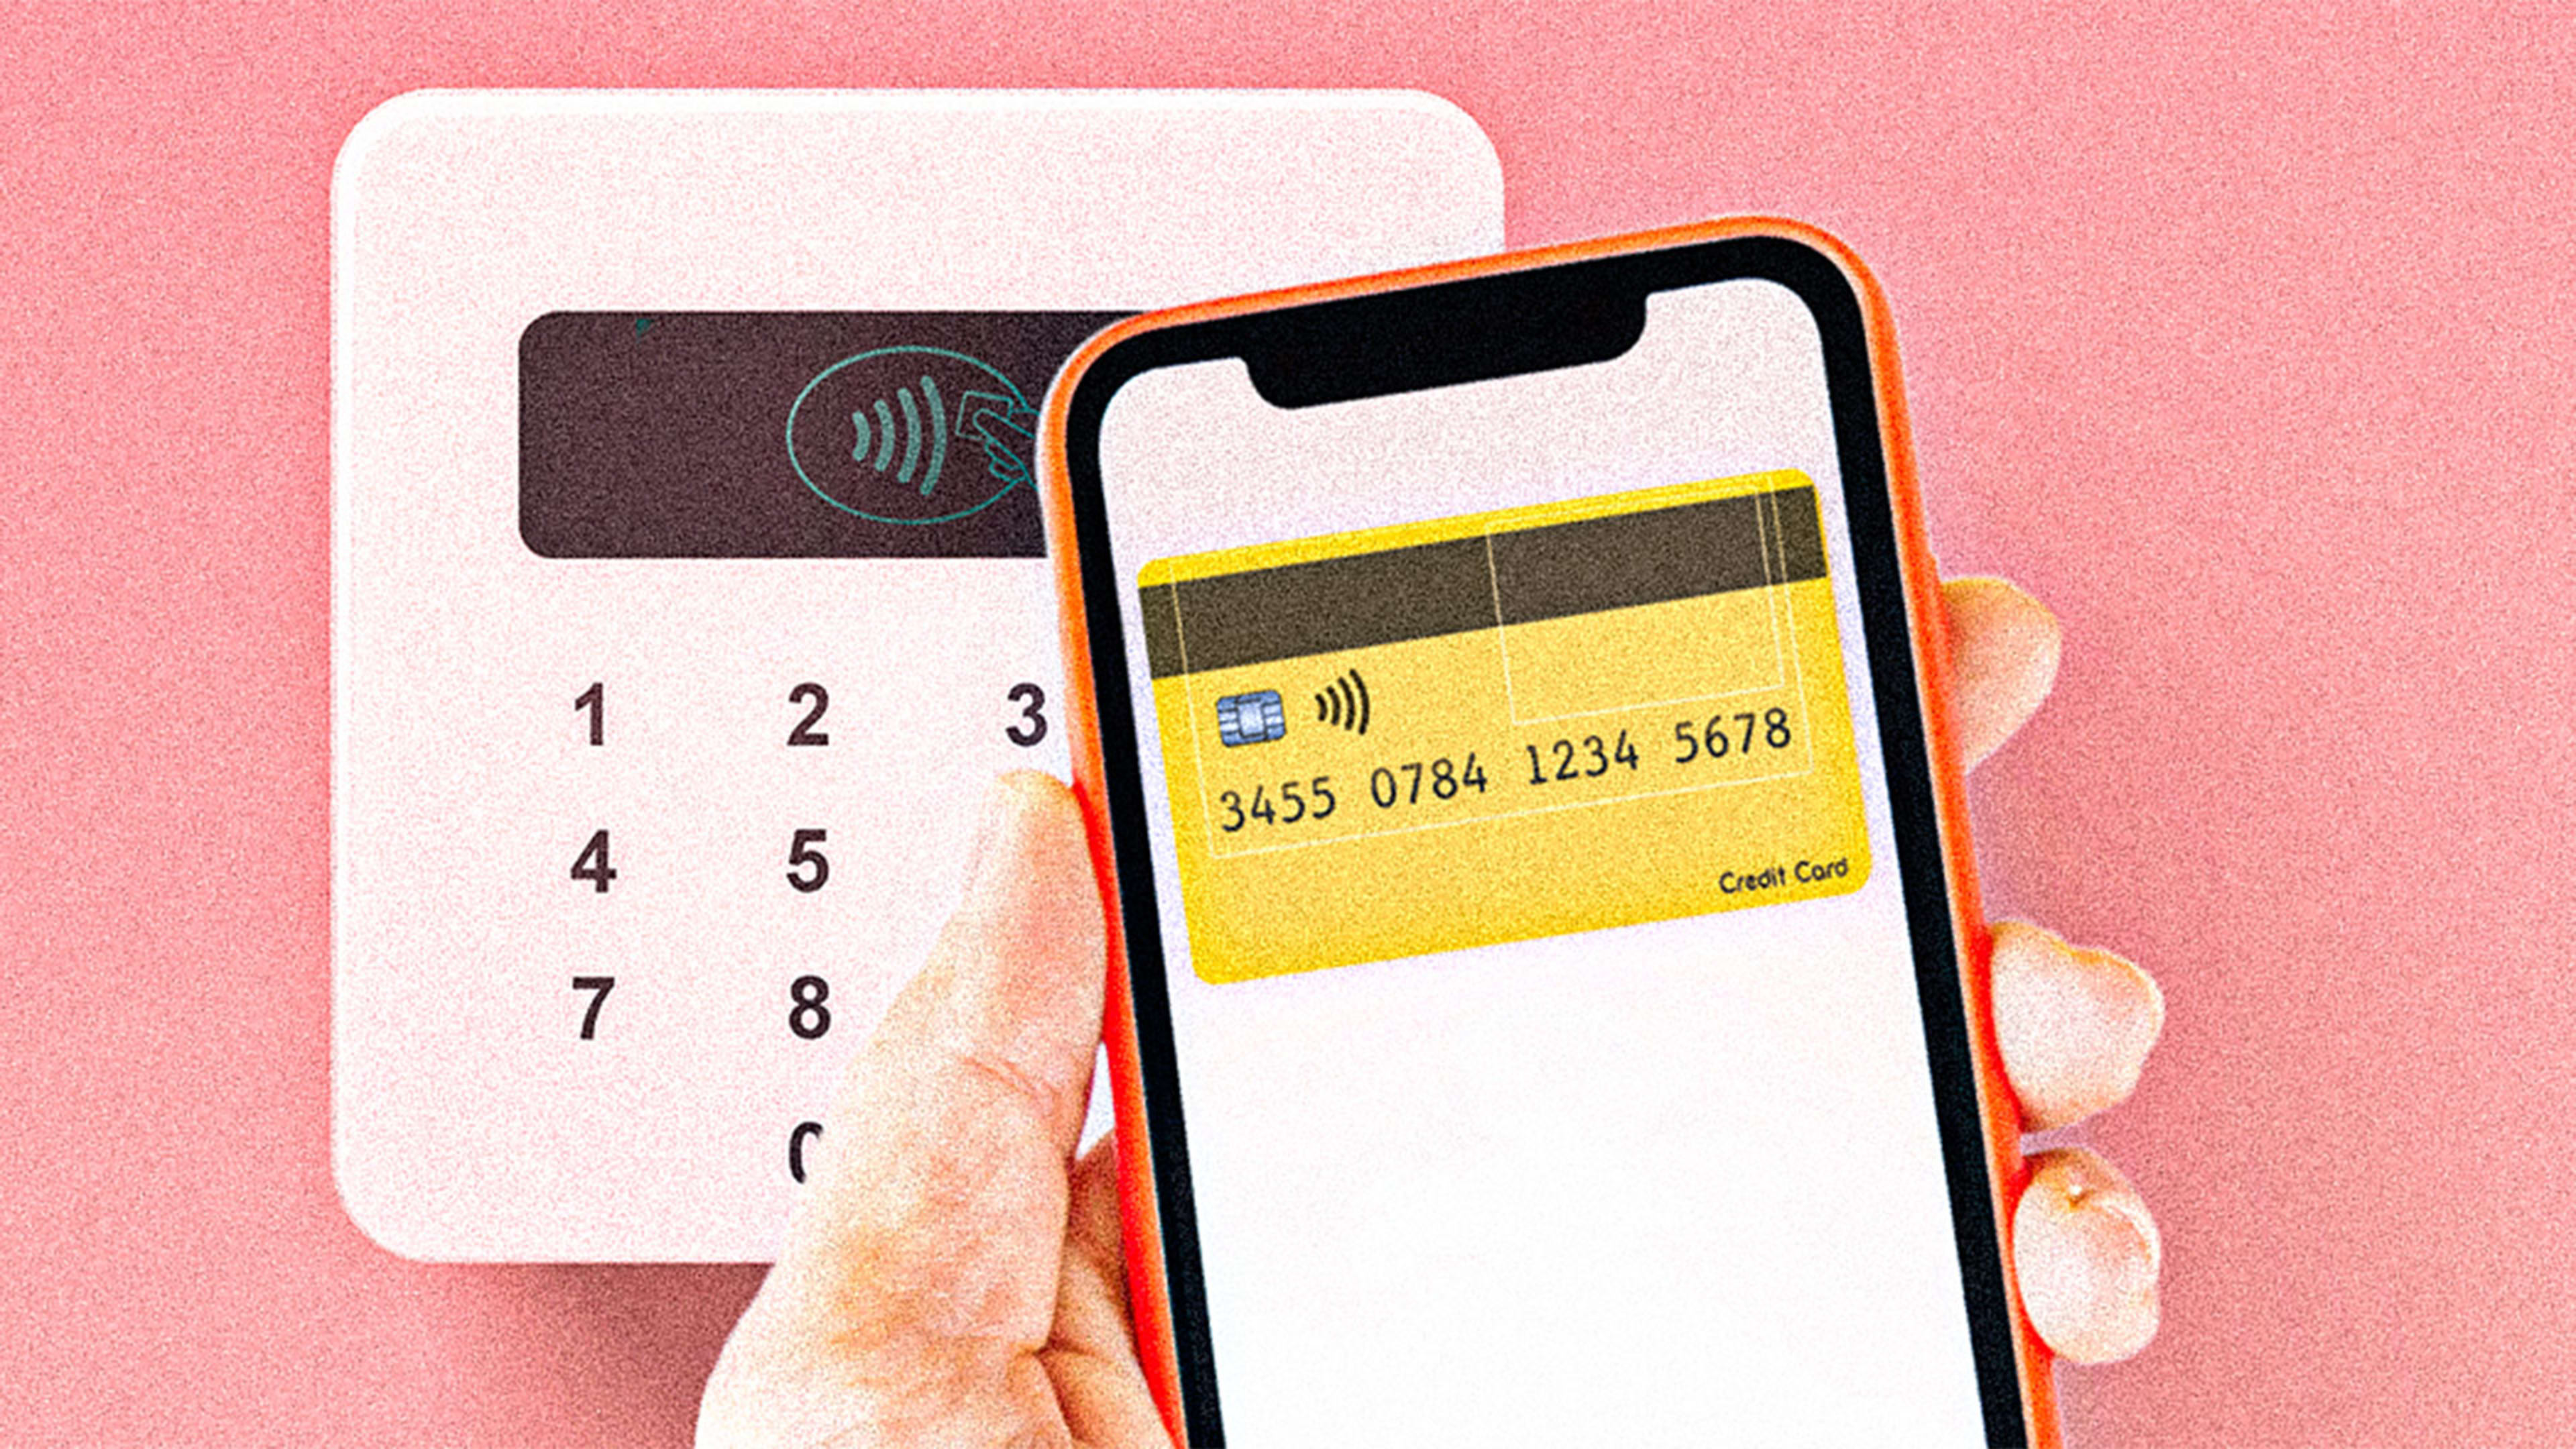 Look out Square: iPhones may soon become contactless payment terminals